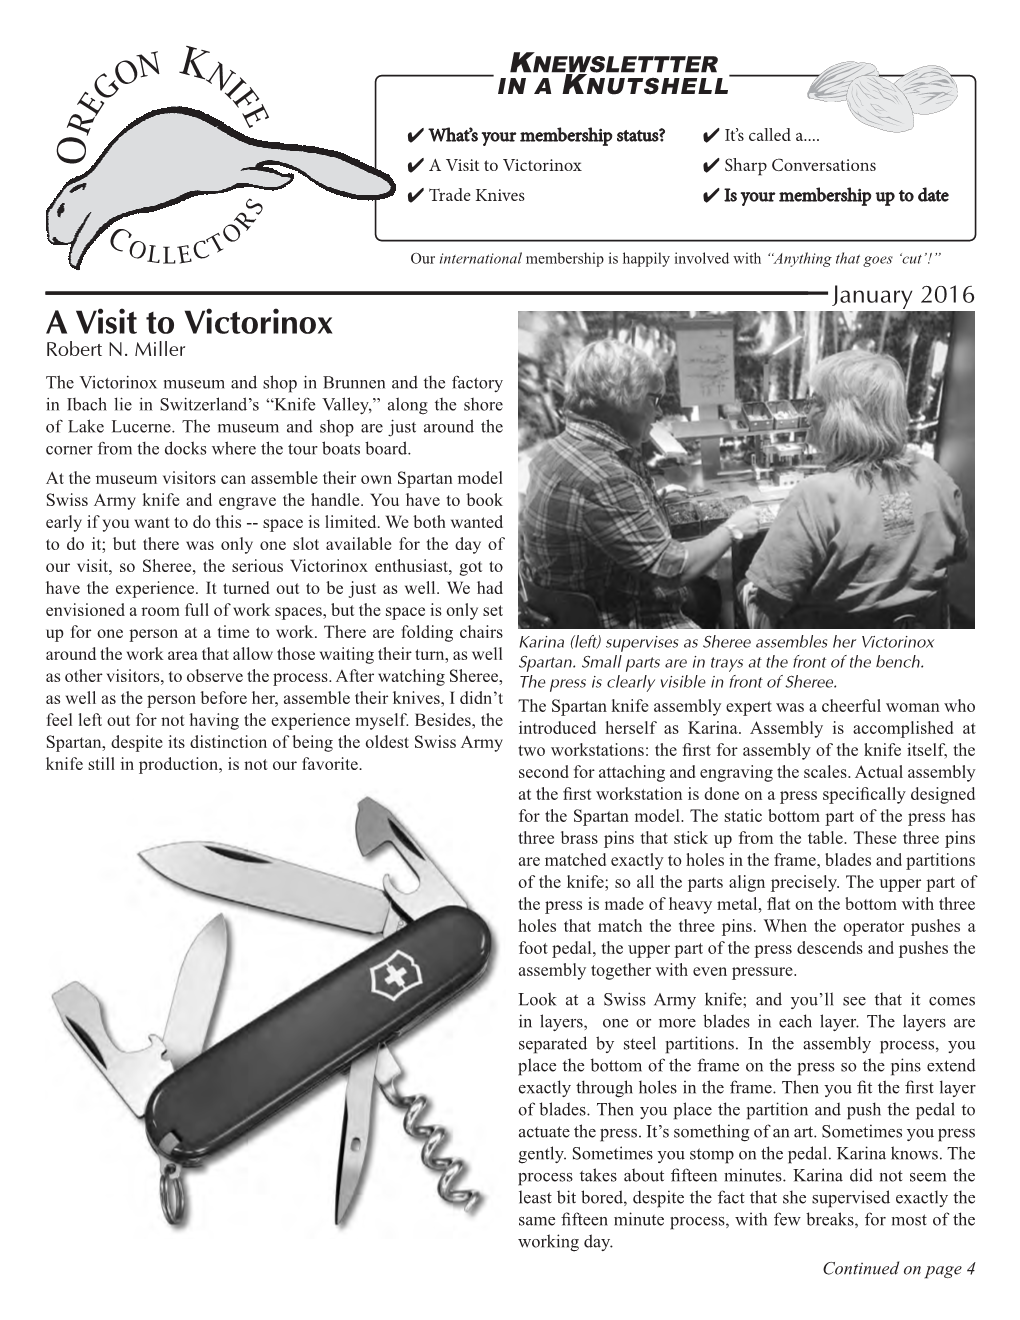 A Visit to Victorinox 4 Sharp Conversations 4 Trade Knives 4 Is Your Membership up to Date